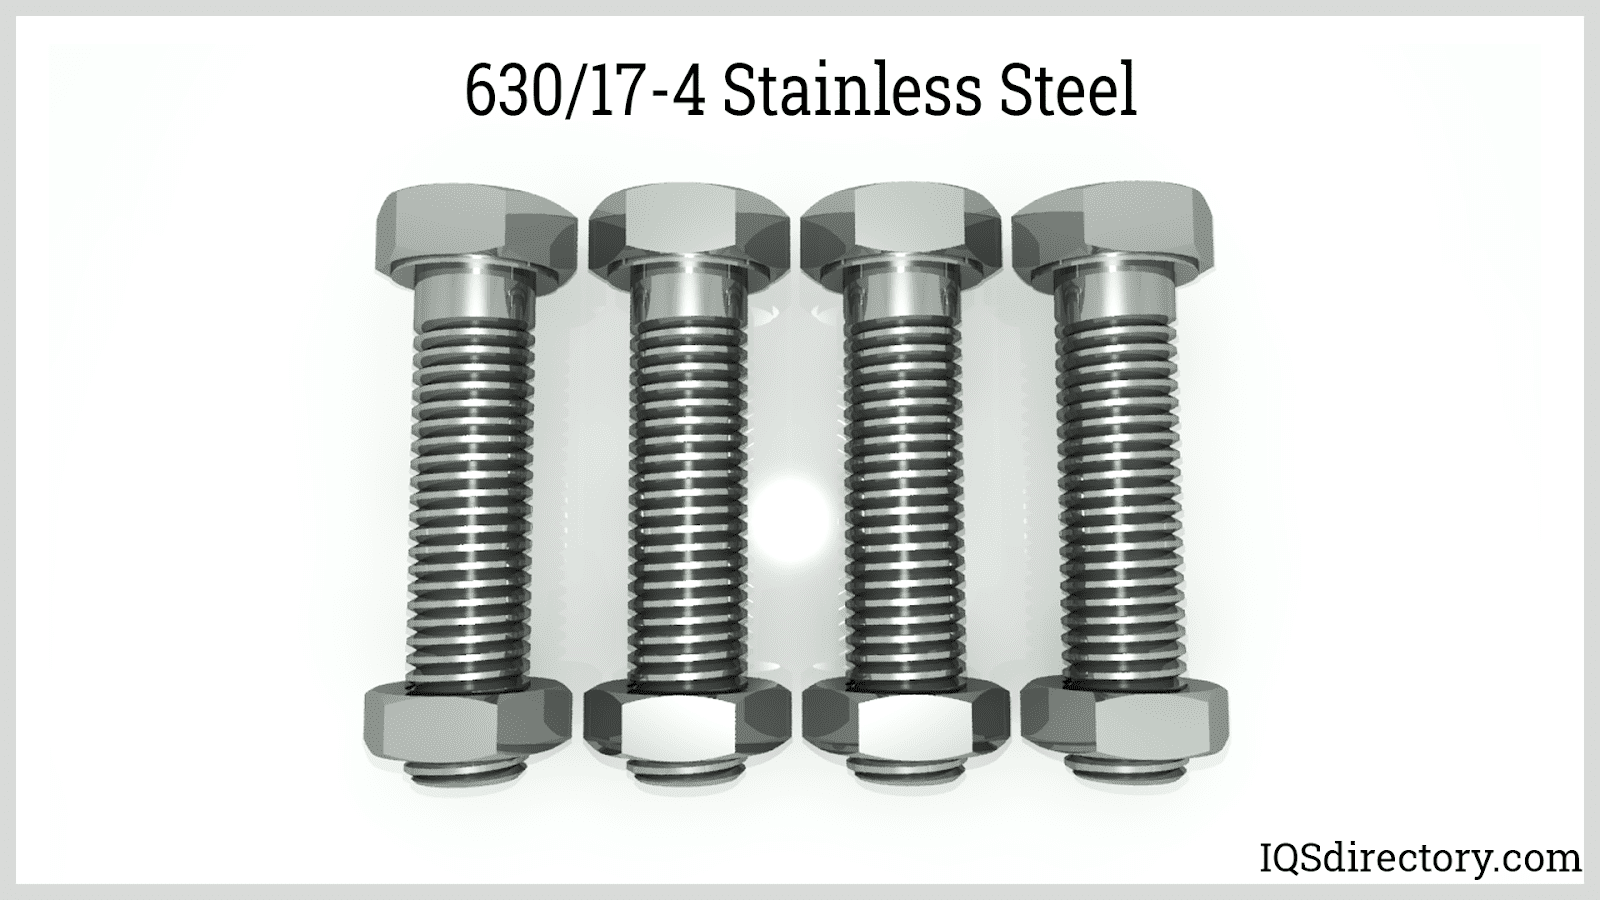 630/17-4 Stainless Steel